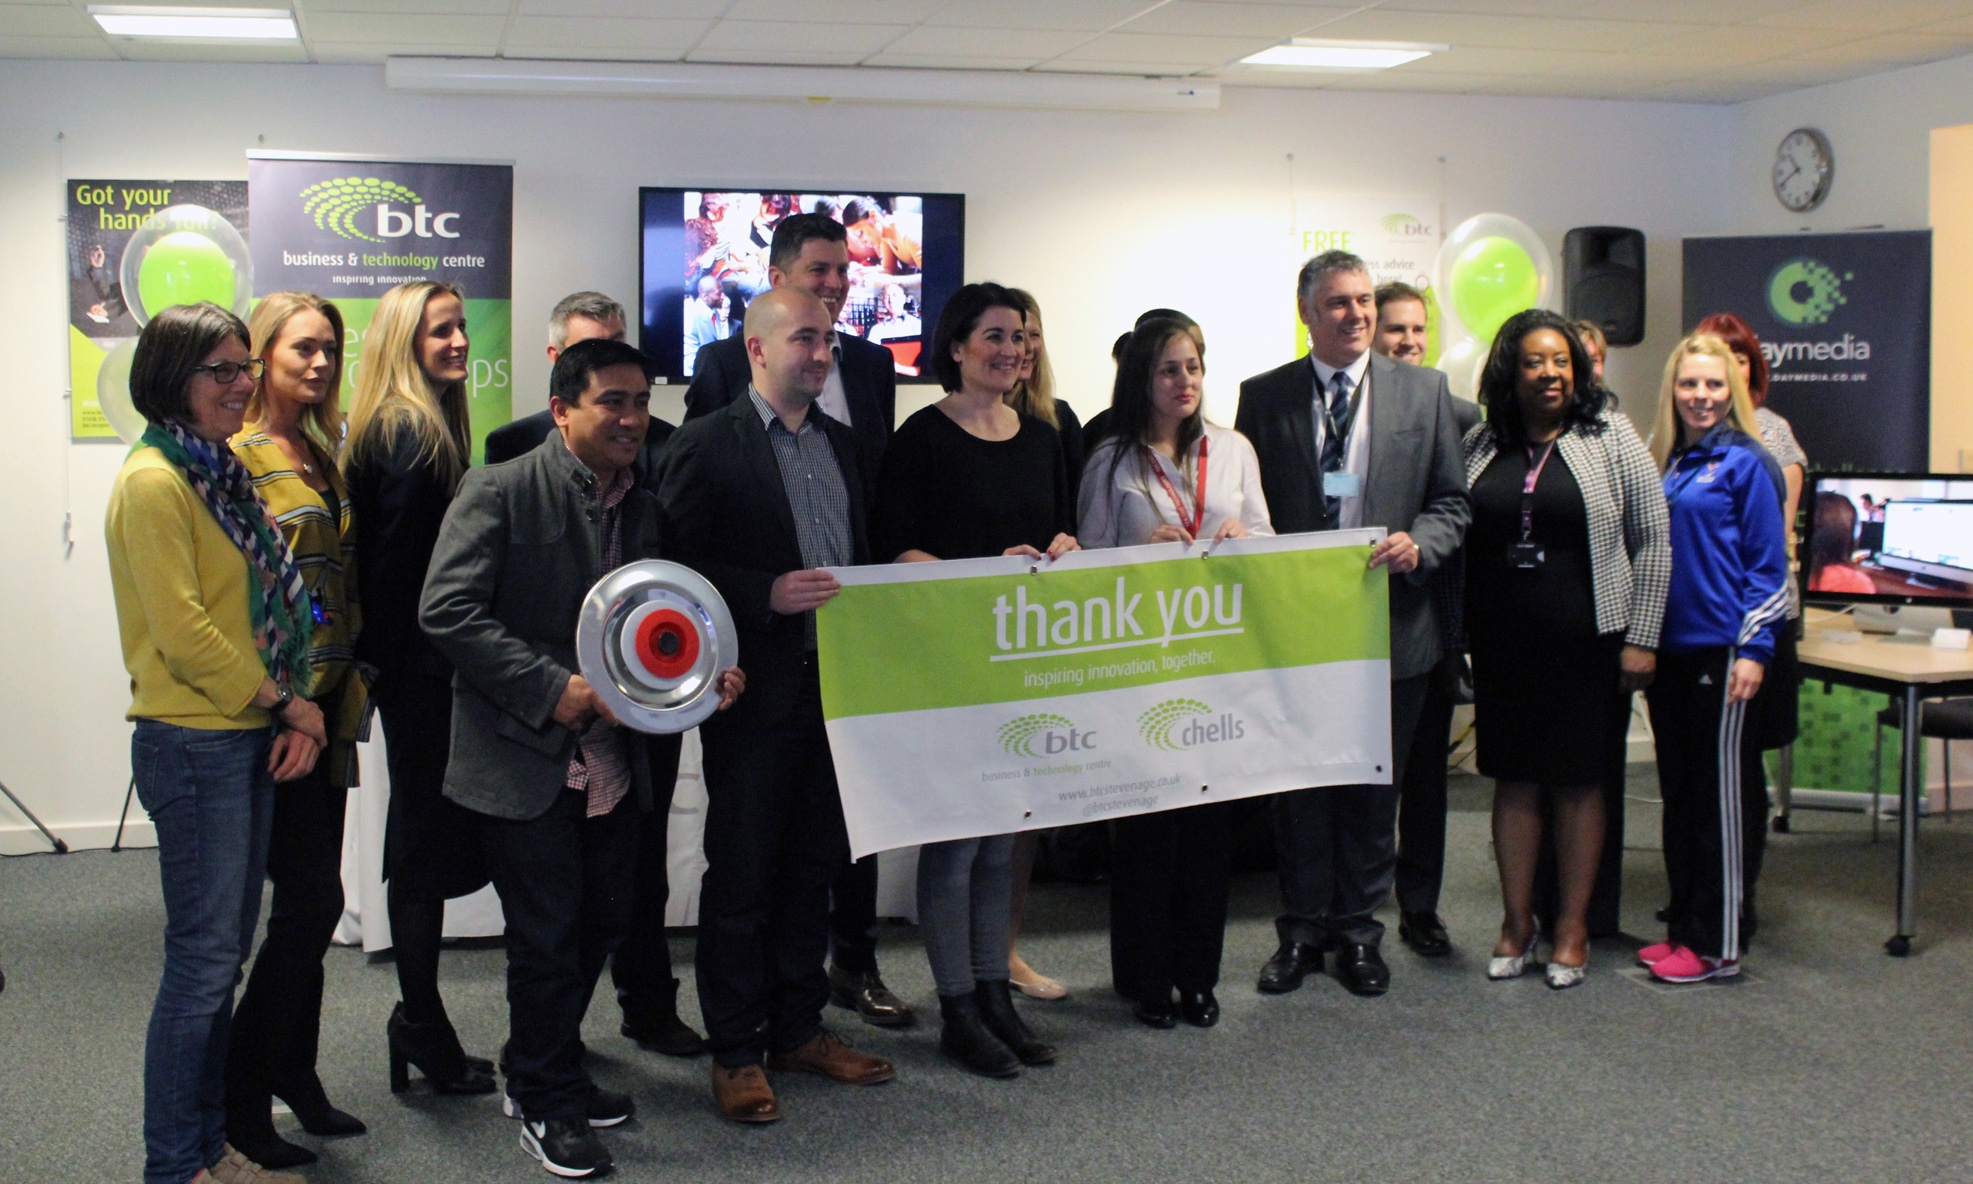 Popular ‘Thank You’ event held for Stevenage small businesses at The Business & Technology Centre